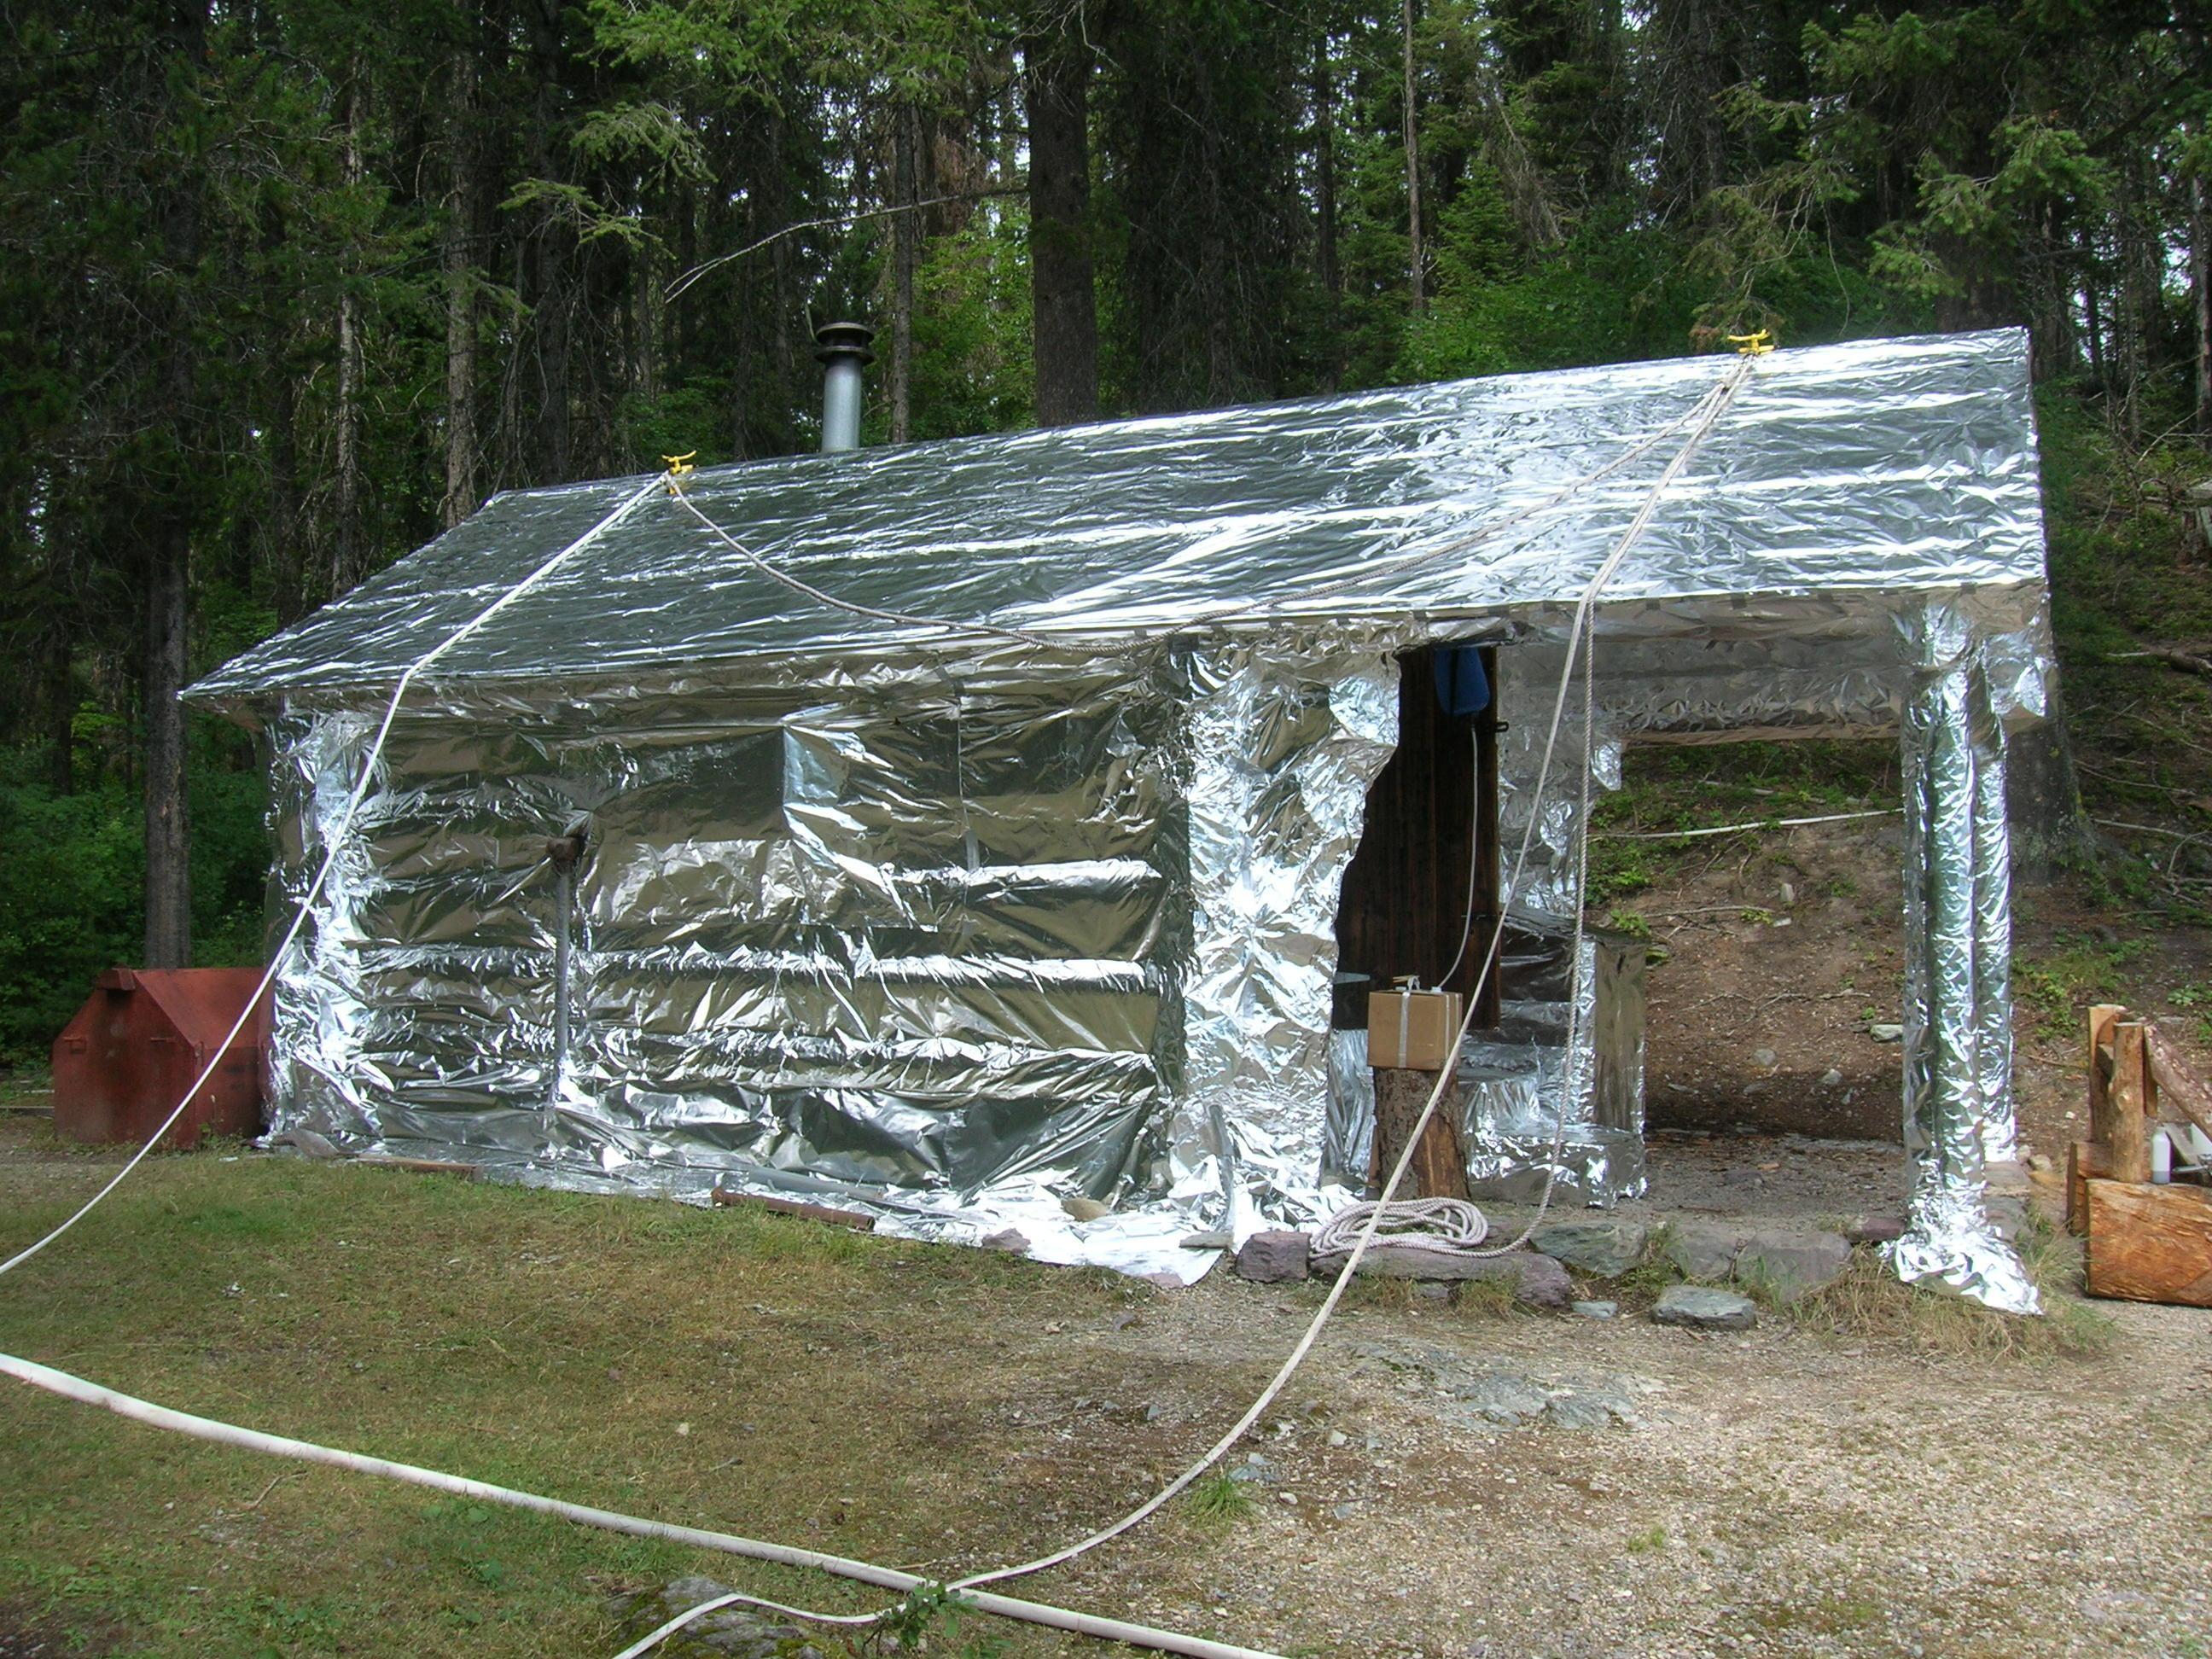 A log cabin is wrapped with silver wrap appearing similar to aluminum foil. Hoses lead to two sprinklers on the roof.